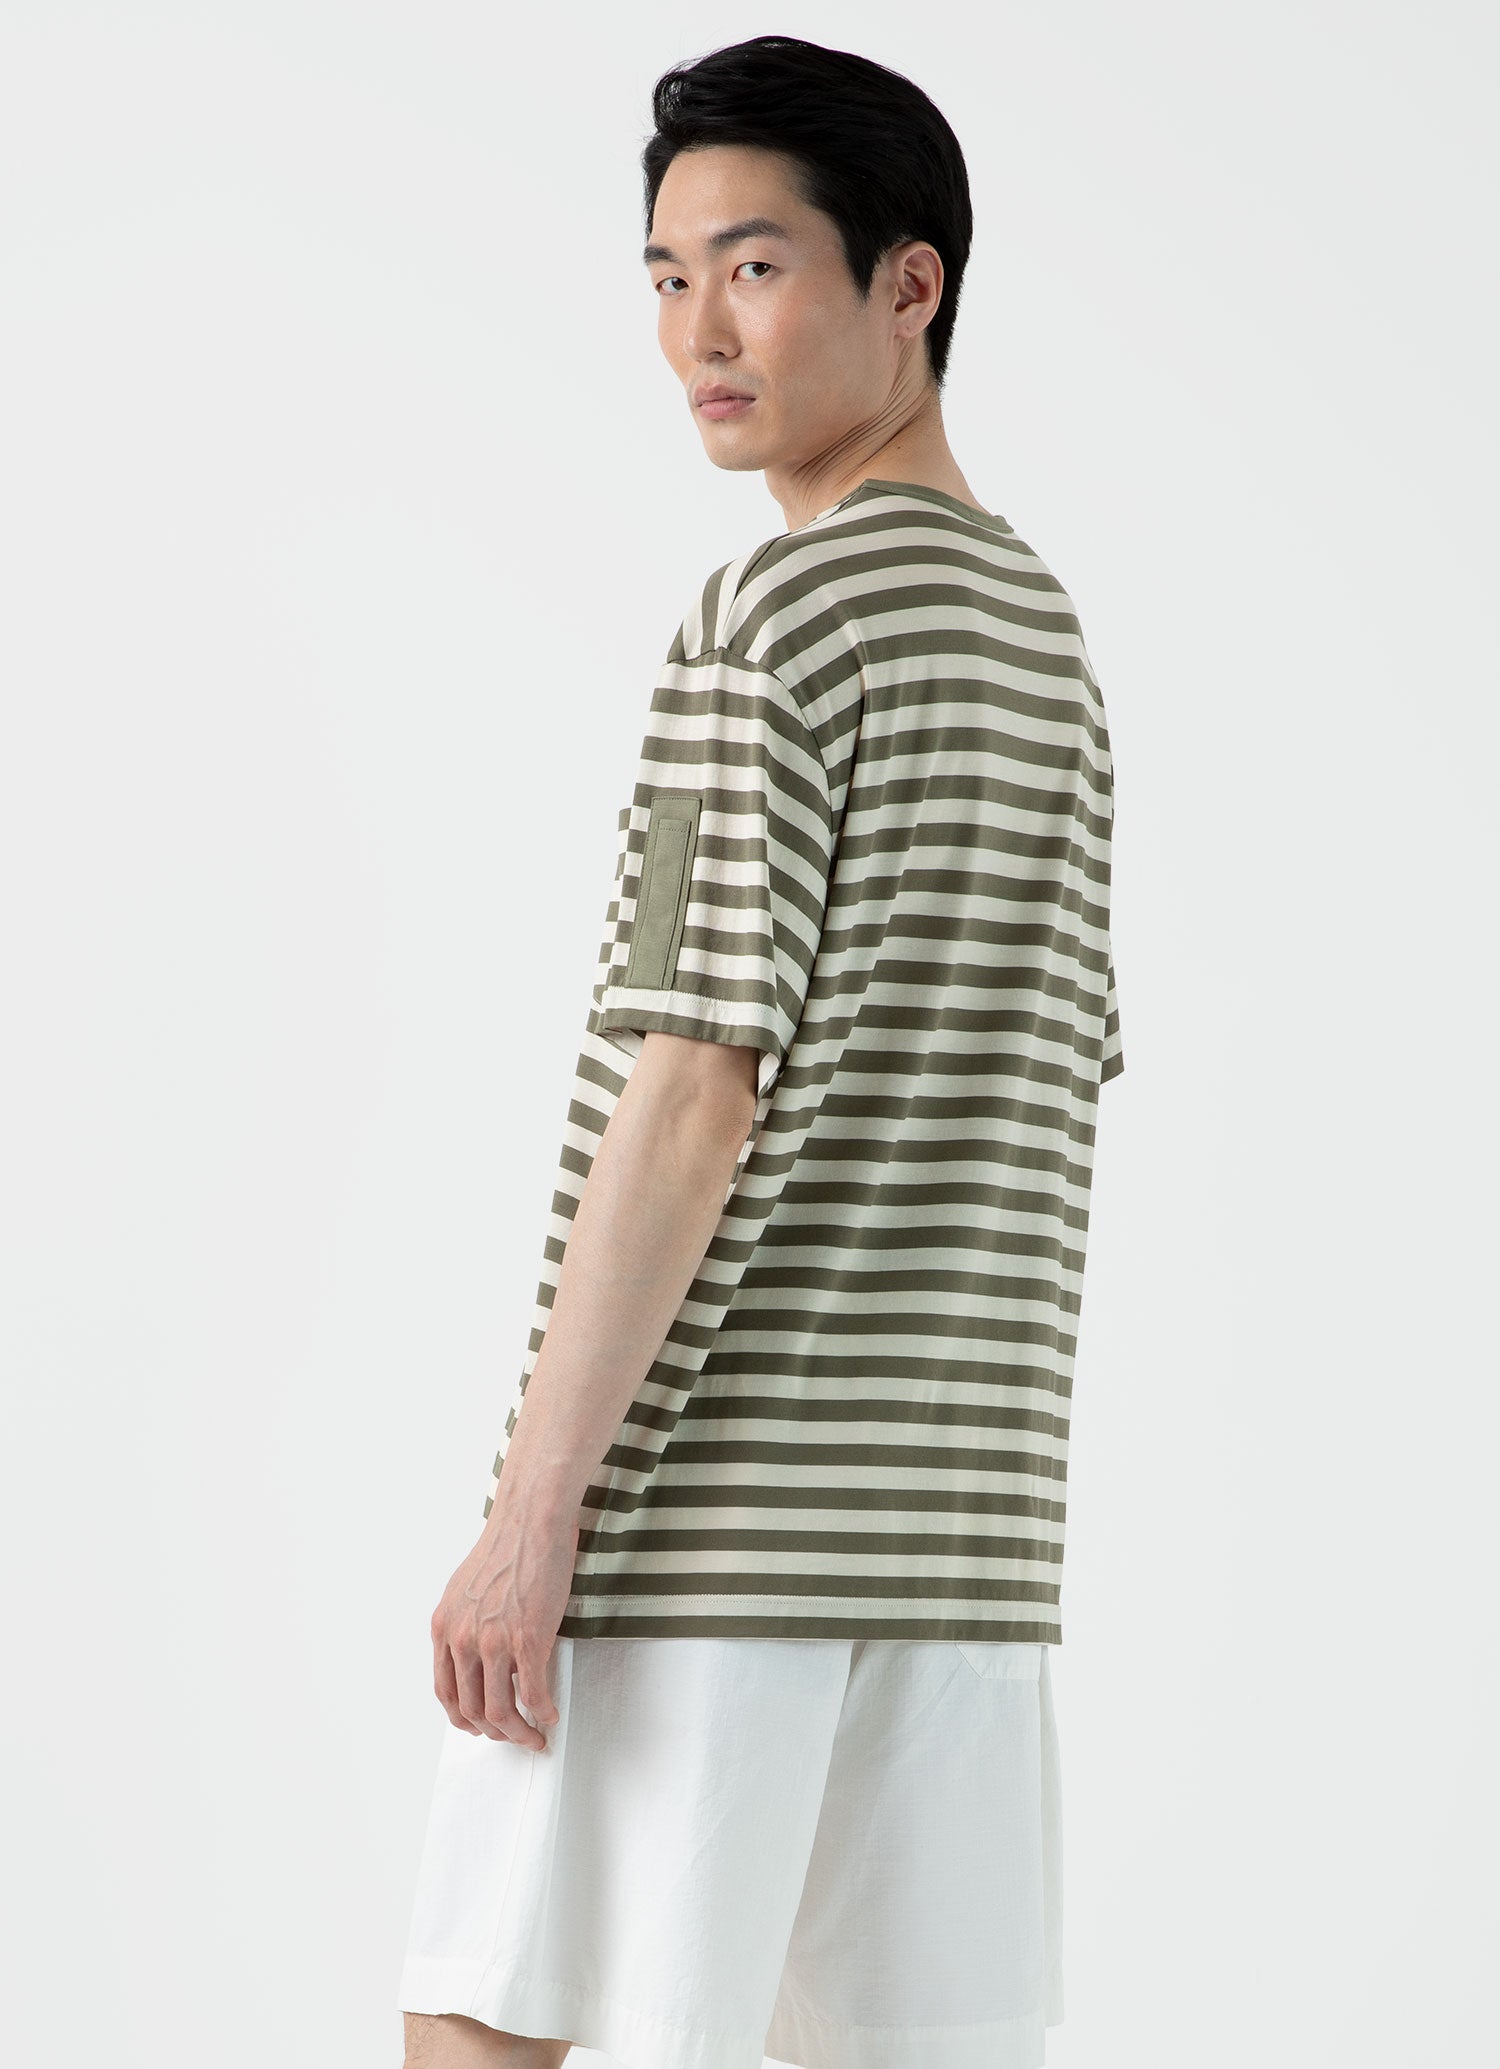 Men's Sunspel x Nigel Cabourn T-shirt in Army Green/Stone White